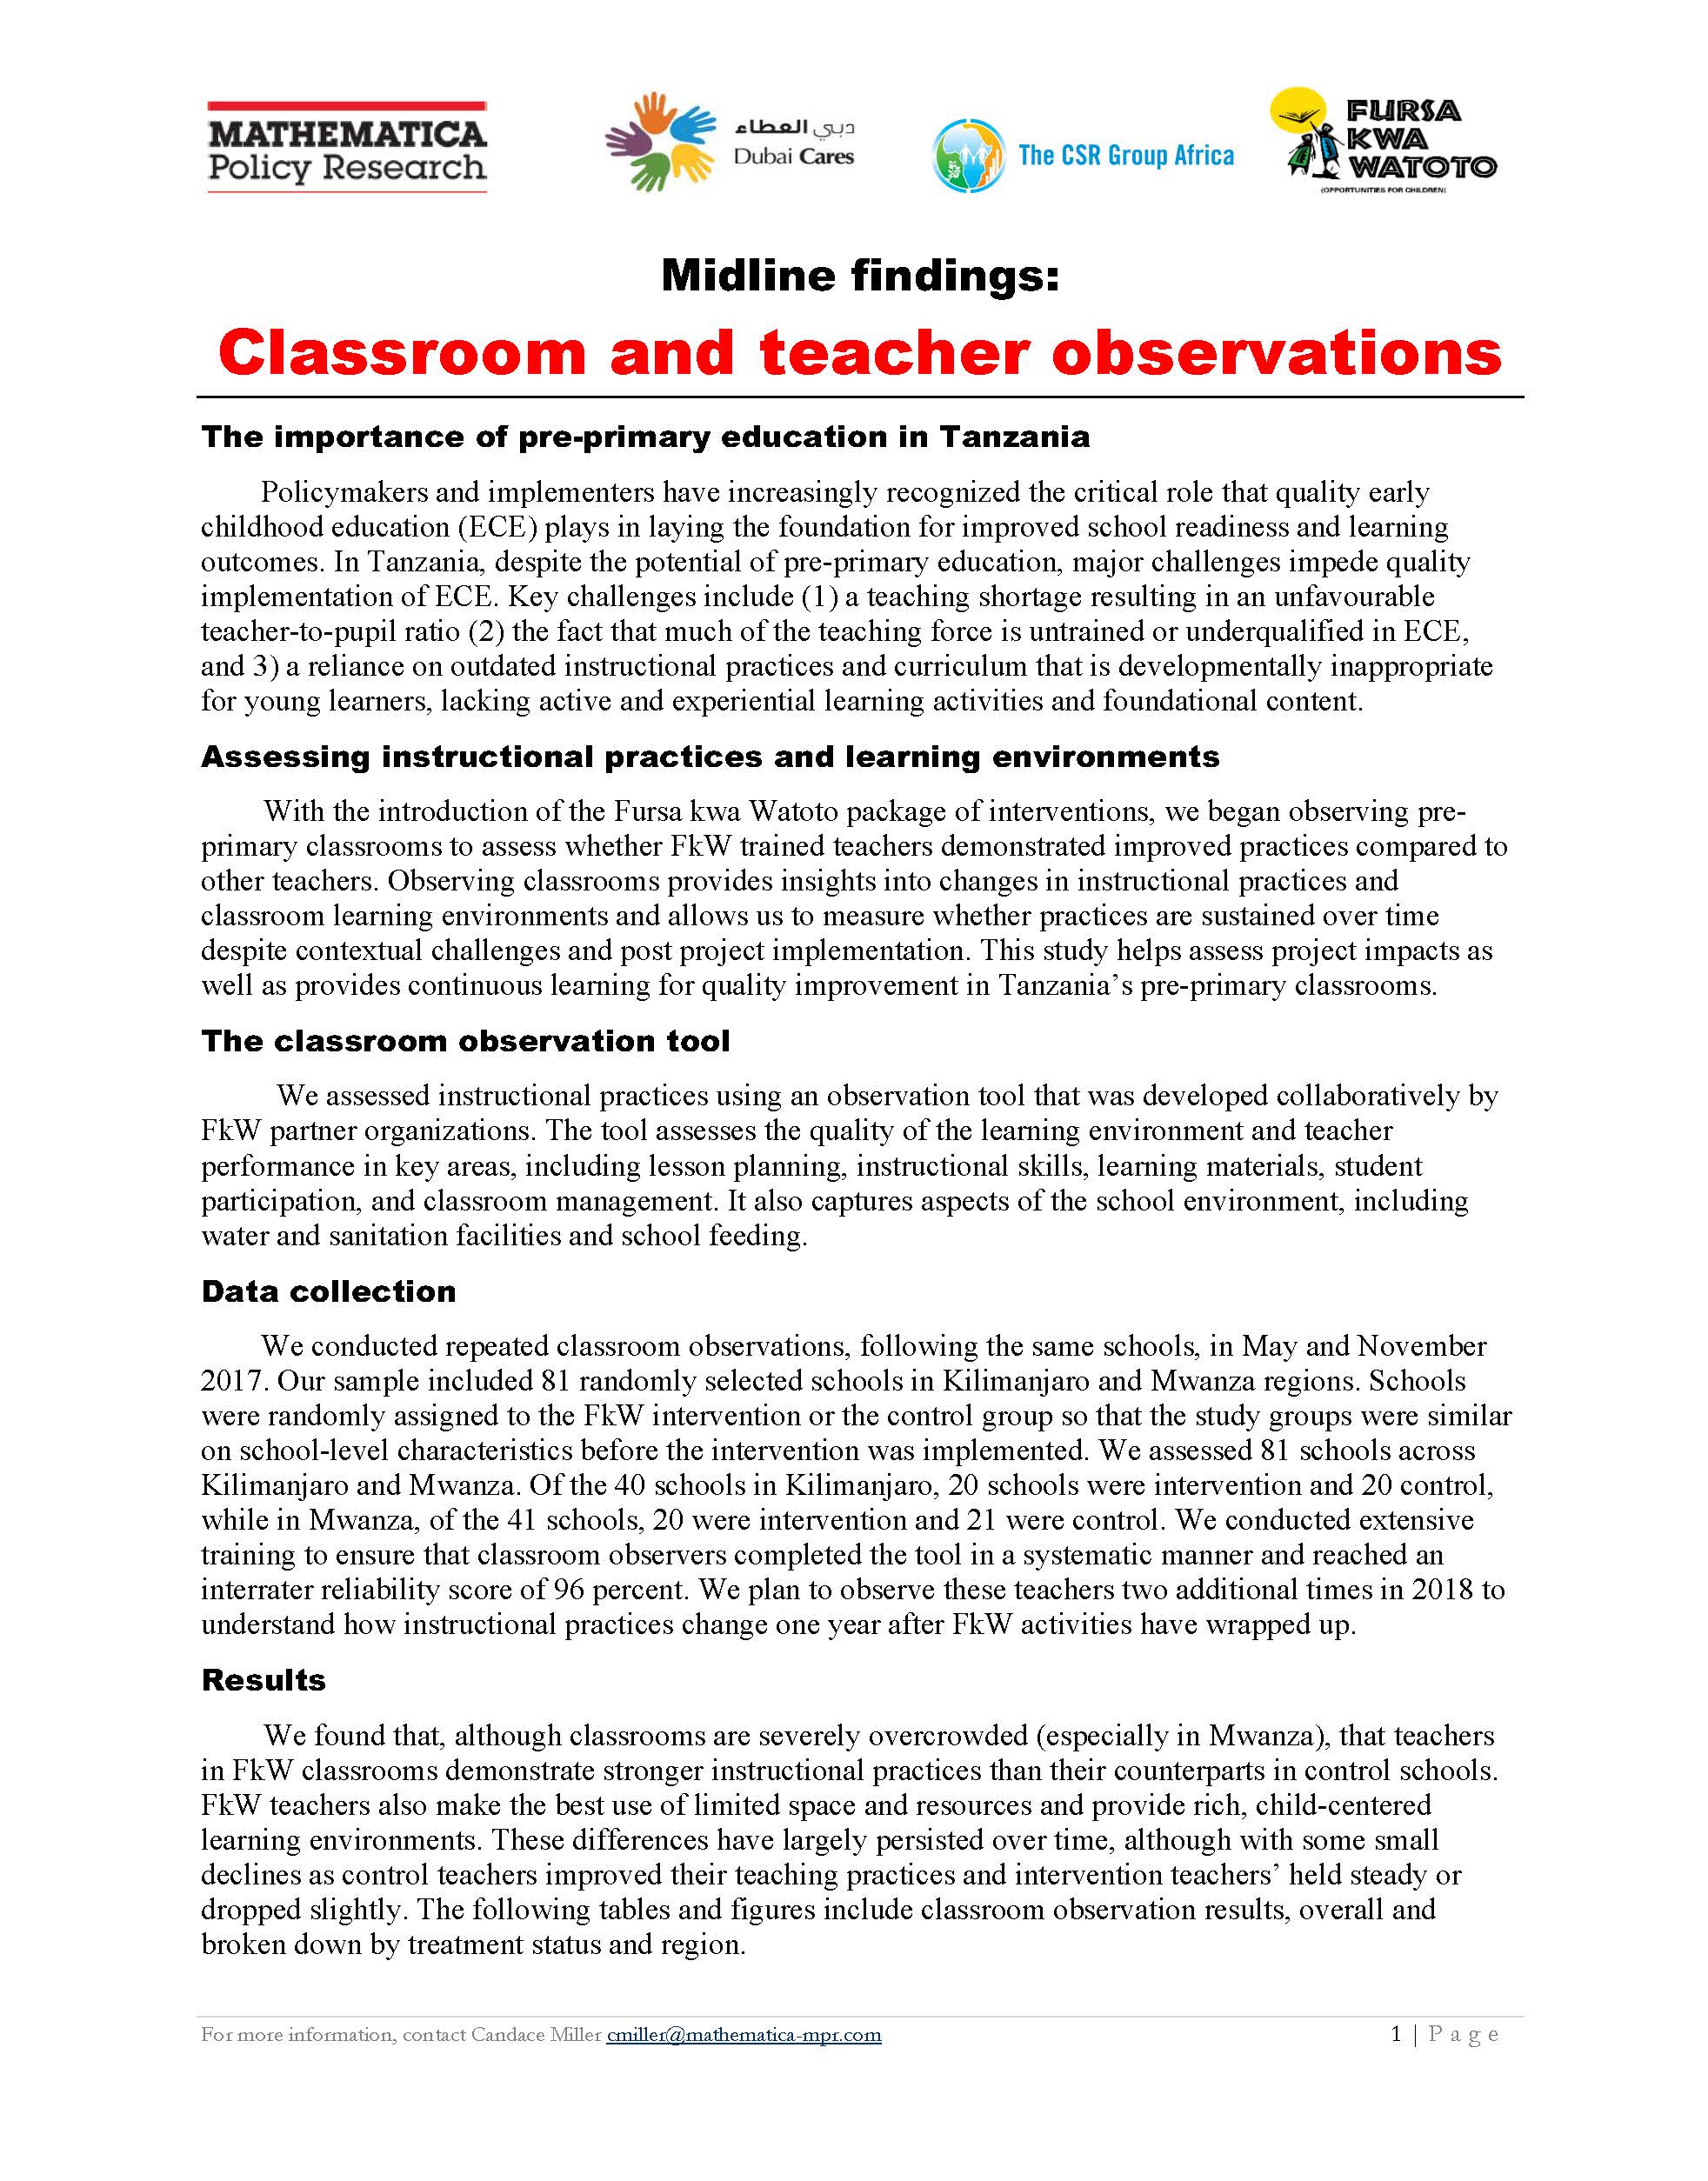 Classroom Observation Results Tables: Learning Agenda